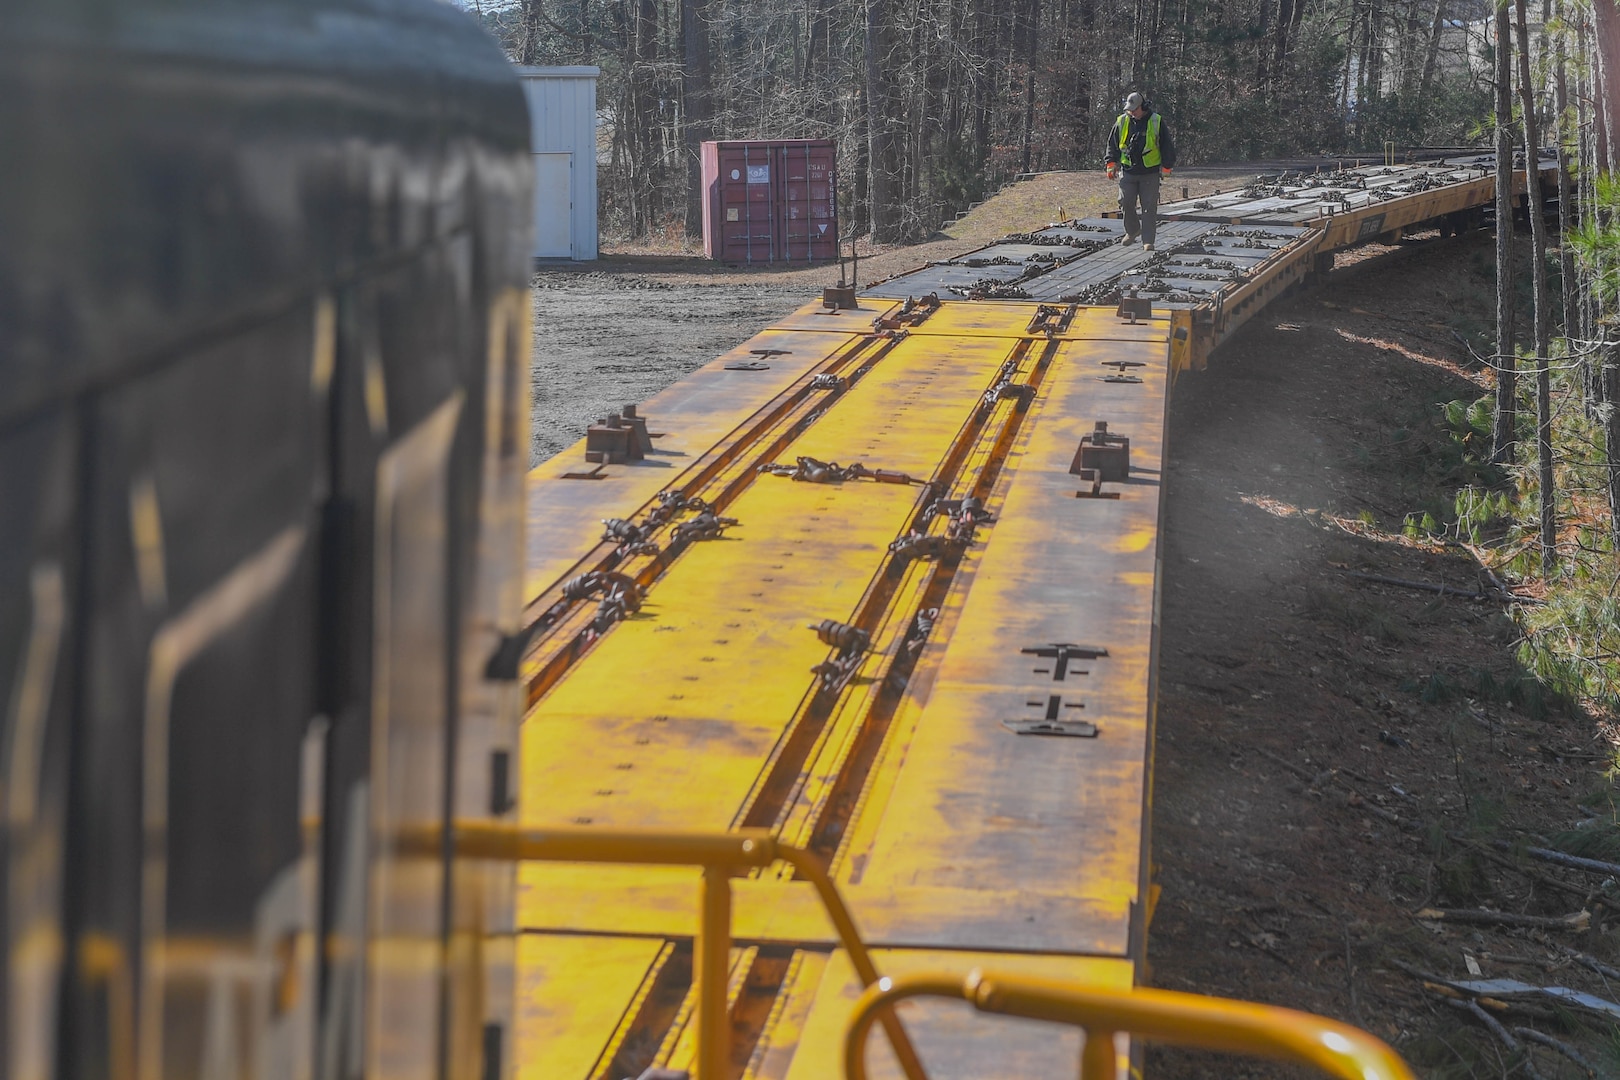 Thomas DeRosier, 733rd Logistics Readiness Squadron Transportation utility rail branch locomotive engineer, checks flatcars at Joint Base Langley-Eustis, Virginia, Feb. 15, 2019. The U.S. Army started planning a railroad at Fort Eustis in May 1918, shortly after establishing the installation in March 1918. (U.S. Air Force photo by Senior Airman Derek Seifert)